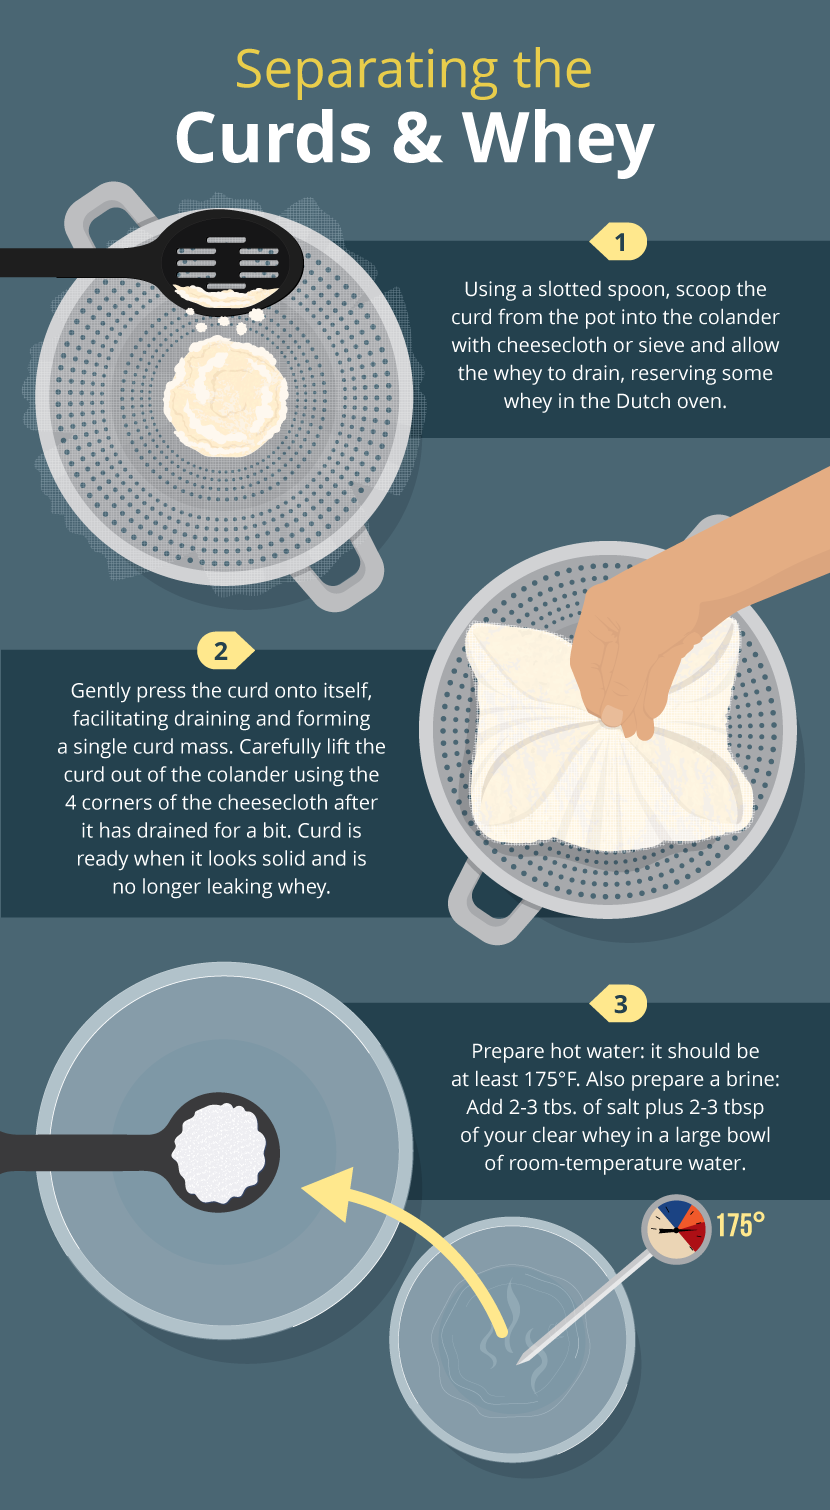 Separating Curds and Whey - Mozzarella Made Easy